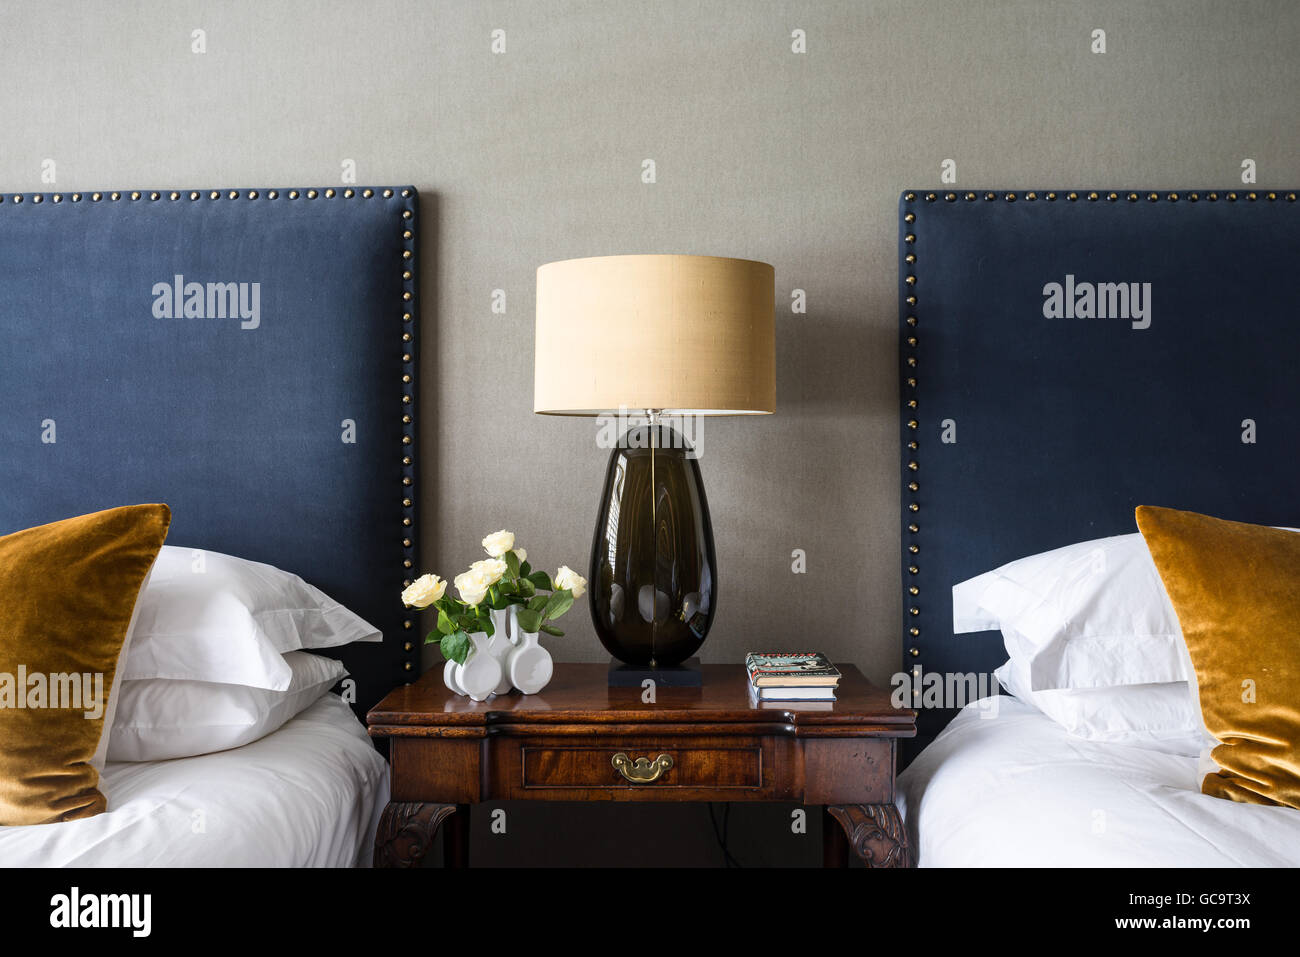 A Port Romana lamp in between twin beds with headboards covered in  Turnell & Gignon's Decortex Fizzy Stock Photo